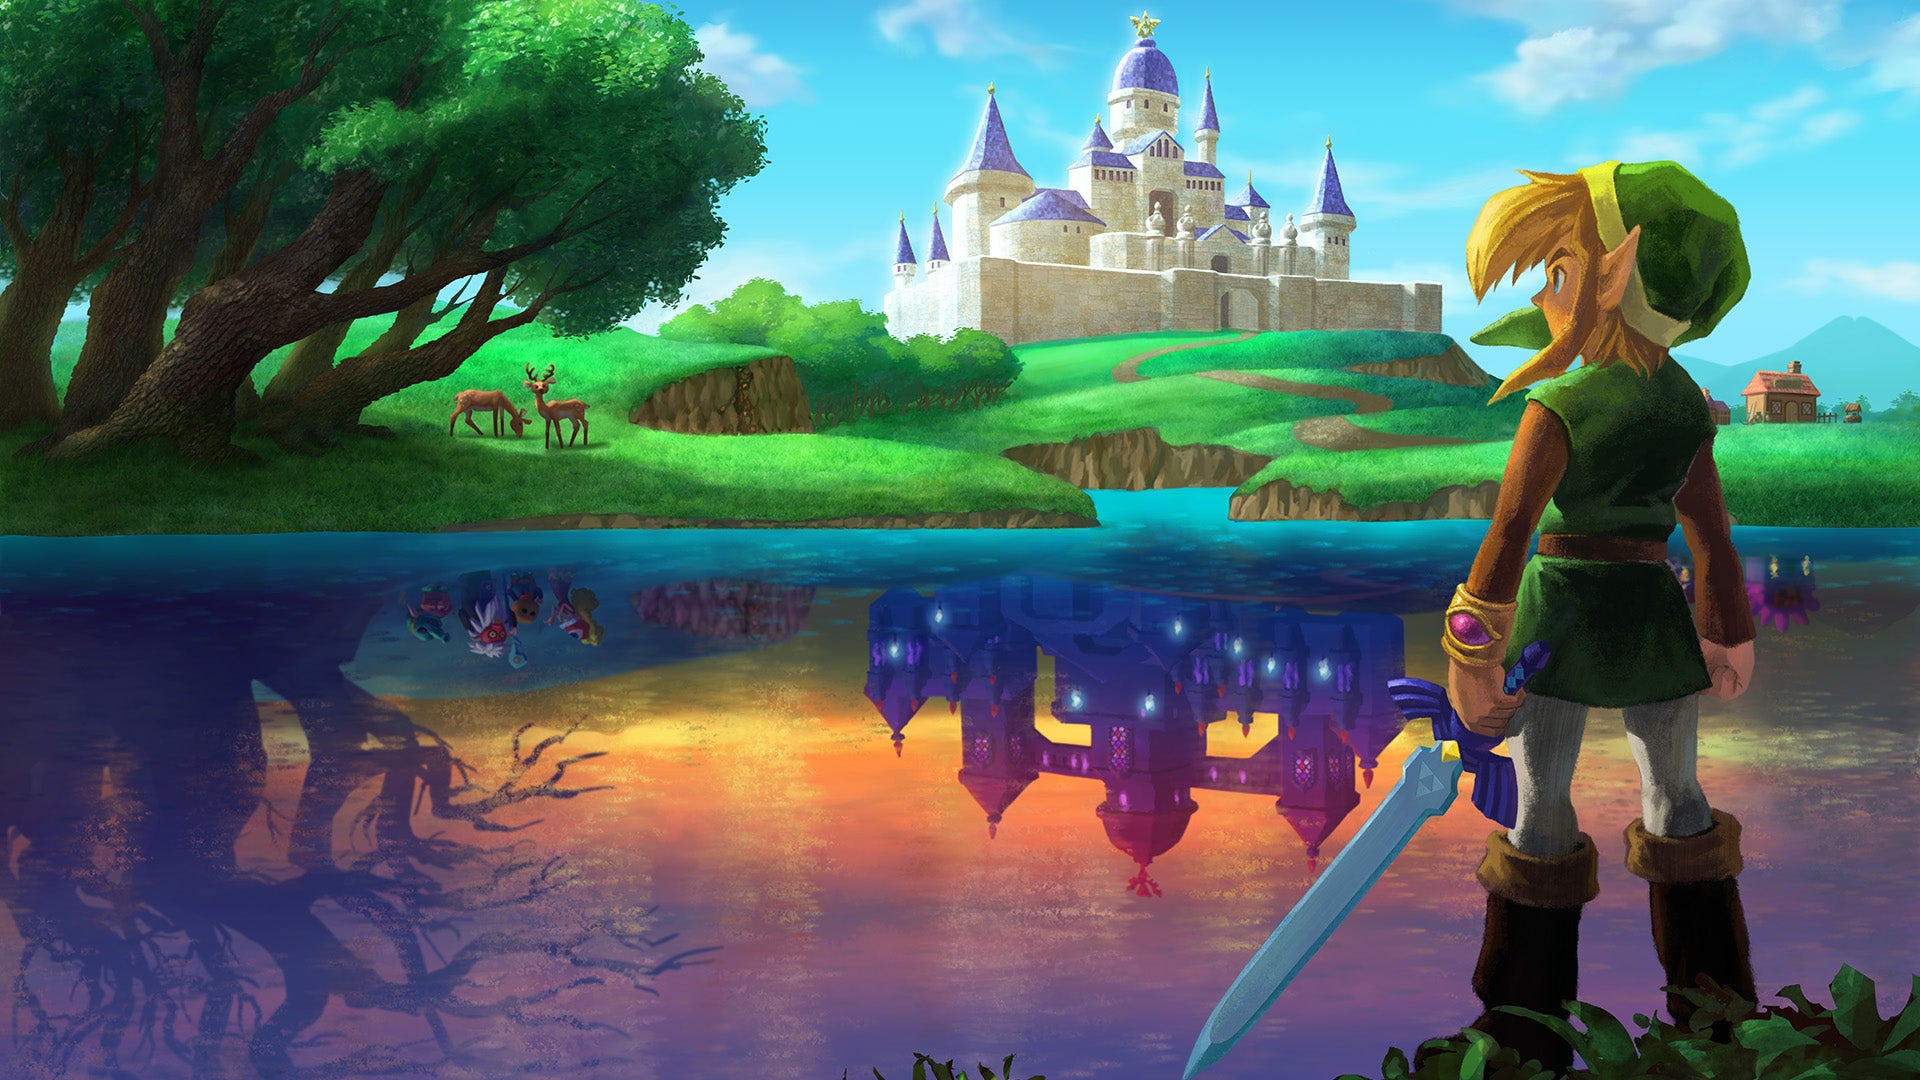 Image for A new 2D Zelda game on Switch is "definitely a possibility"